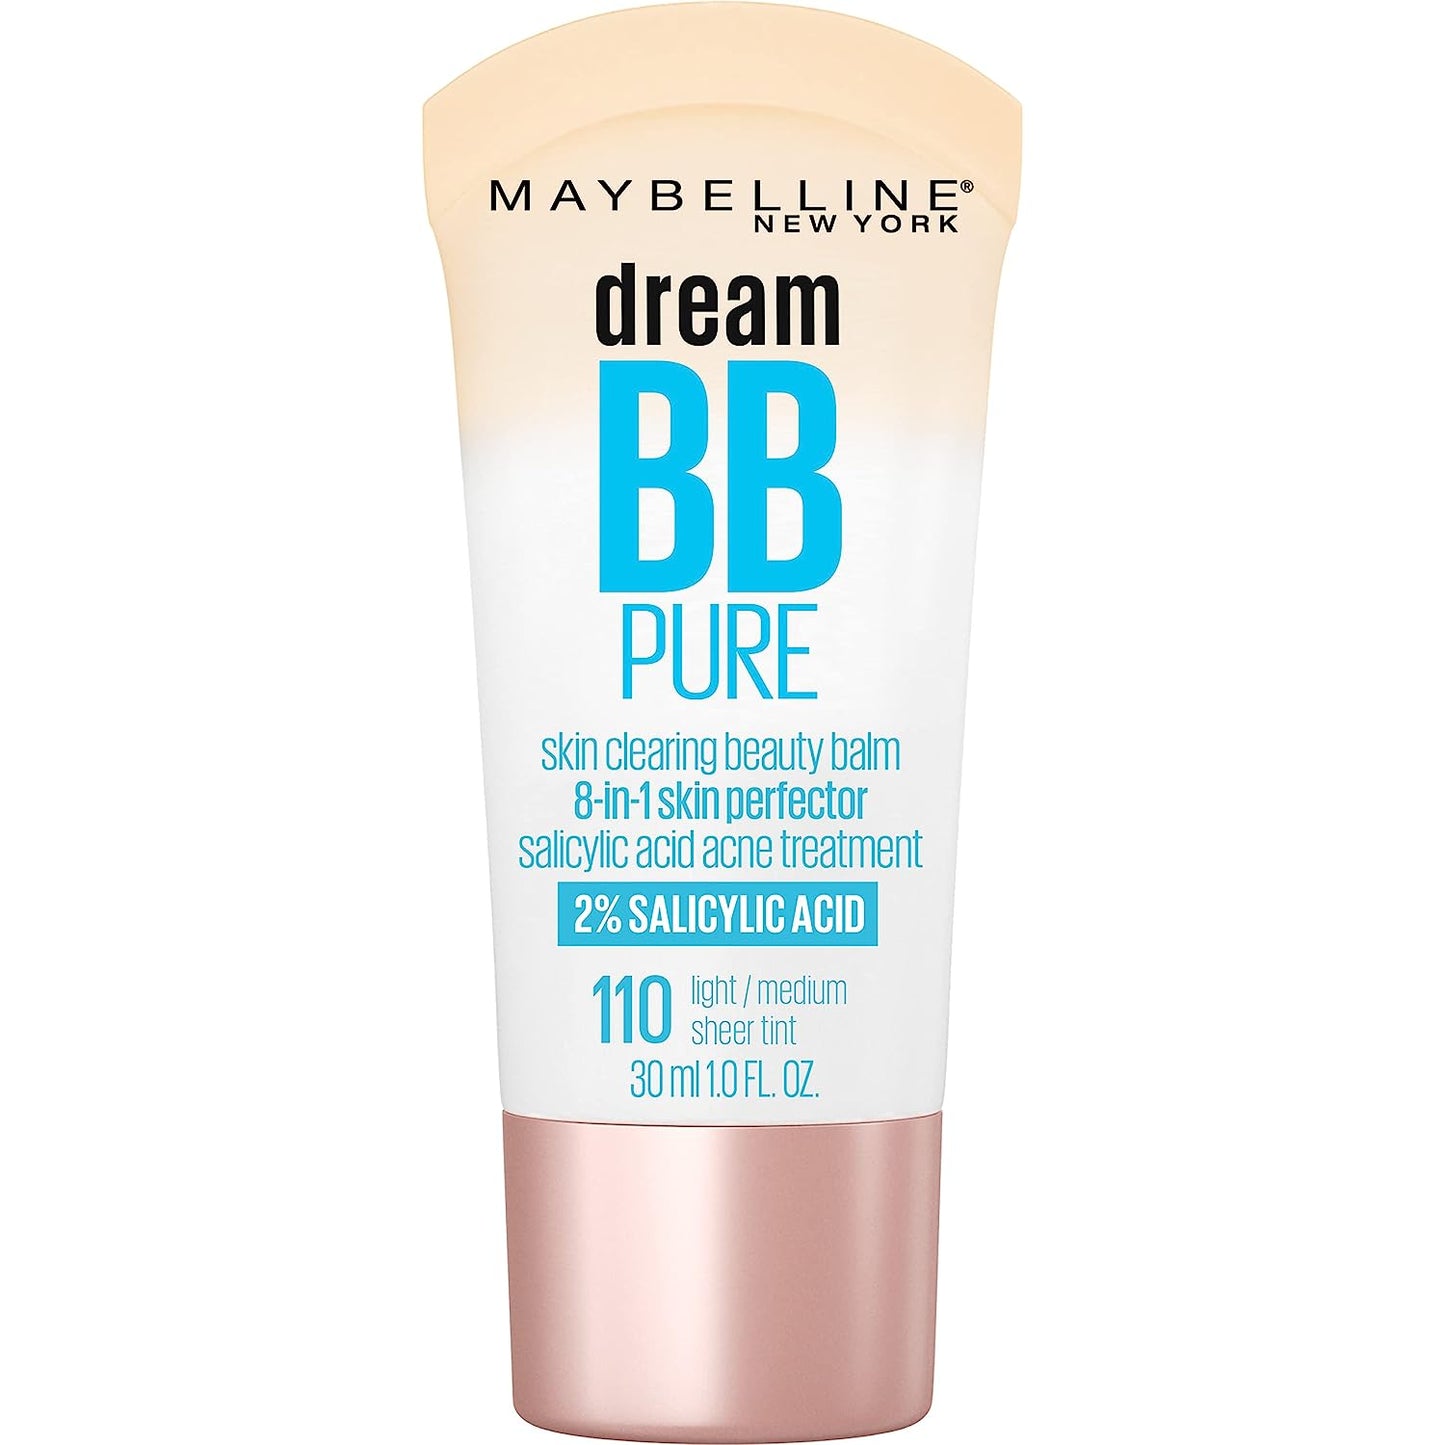 Maybelline New York Dream BB Pure with Sheer Tint Coverage - 30ml / 1.0 fl oz